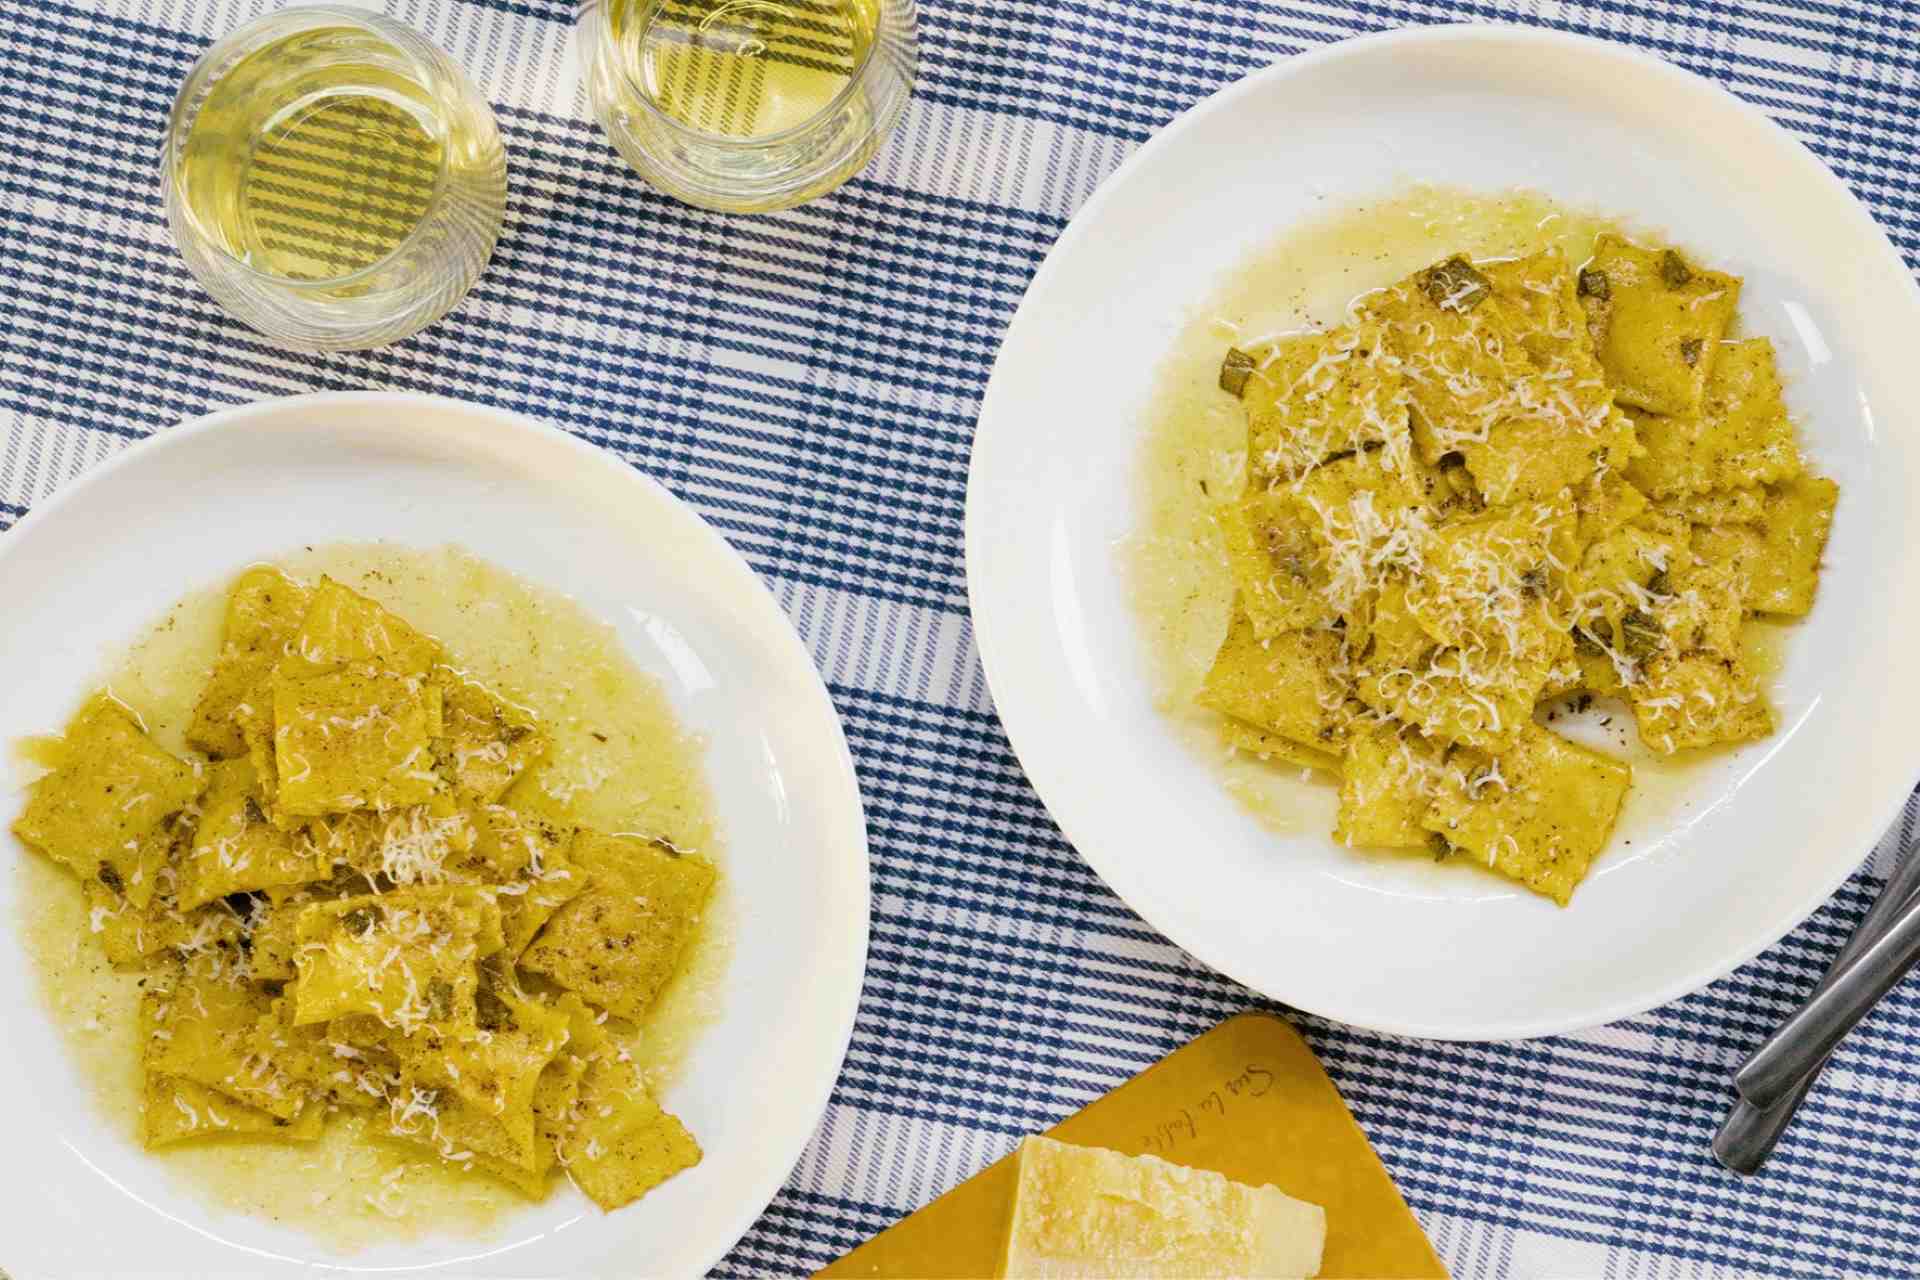 Homemade Butternut Squash Agnolotti With Sage Brown Butter Sauce Recipe